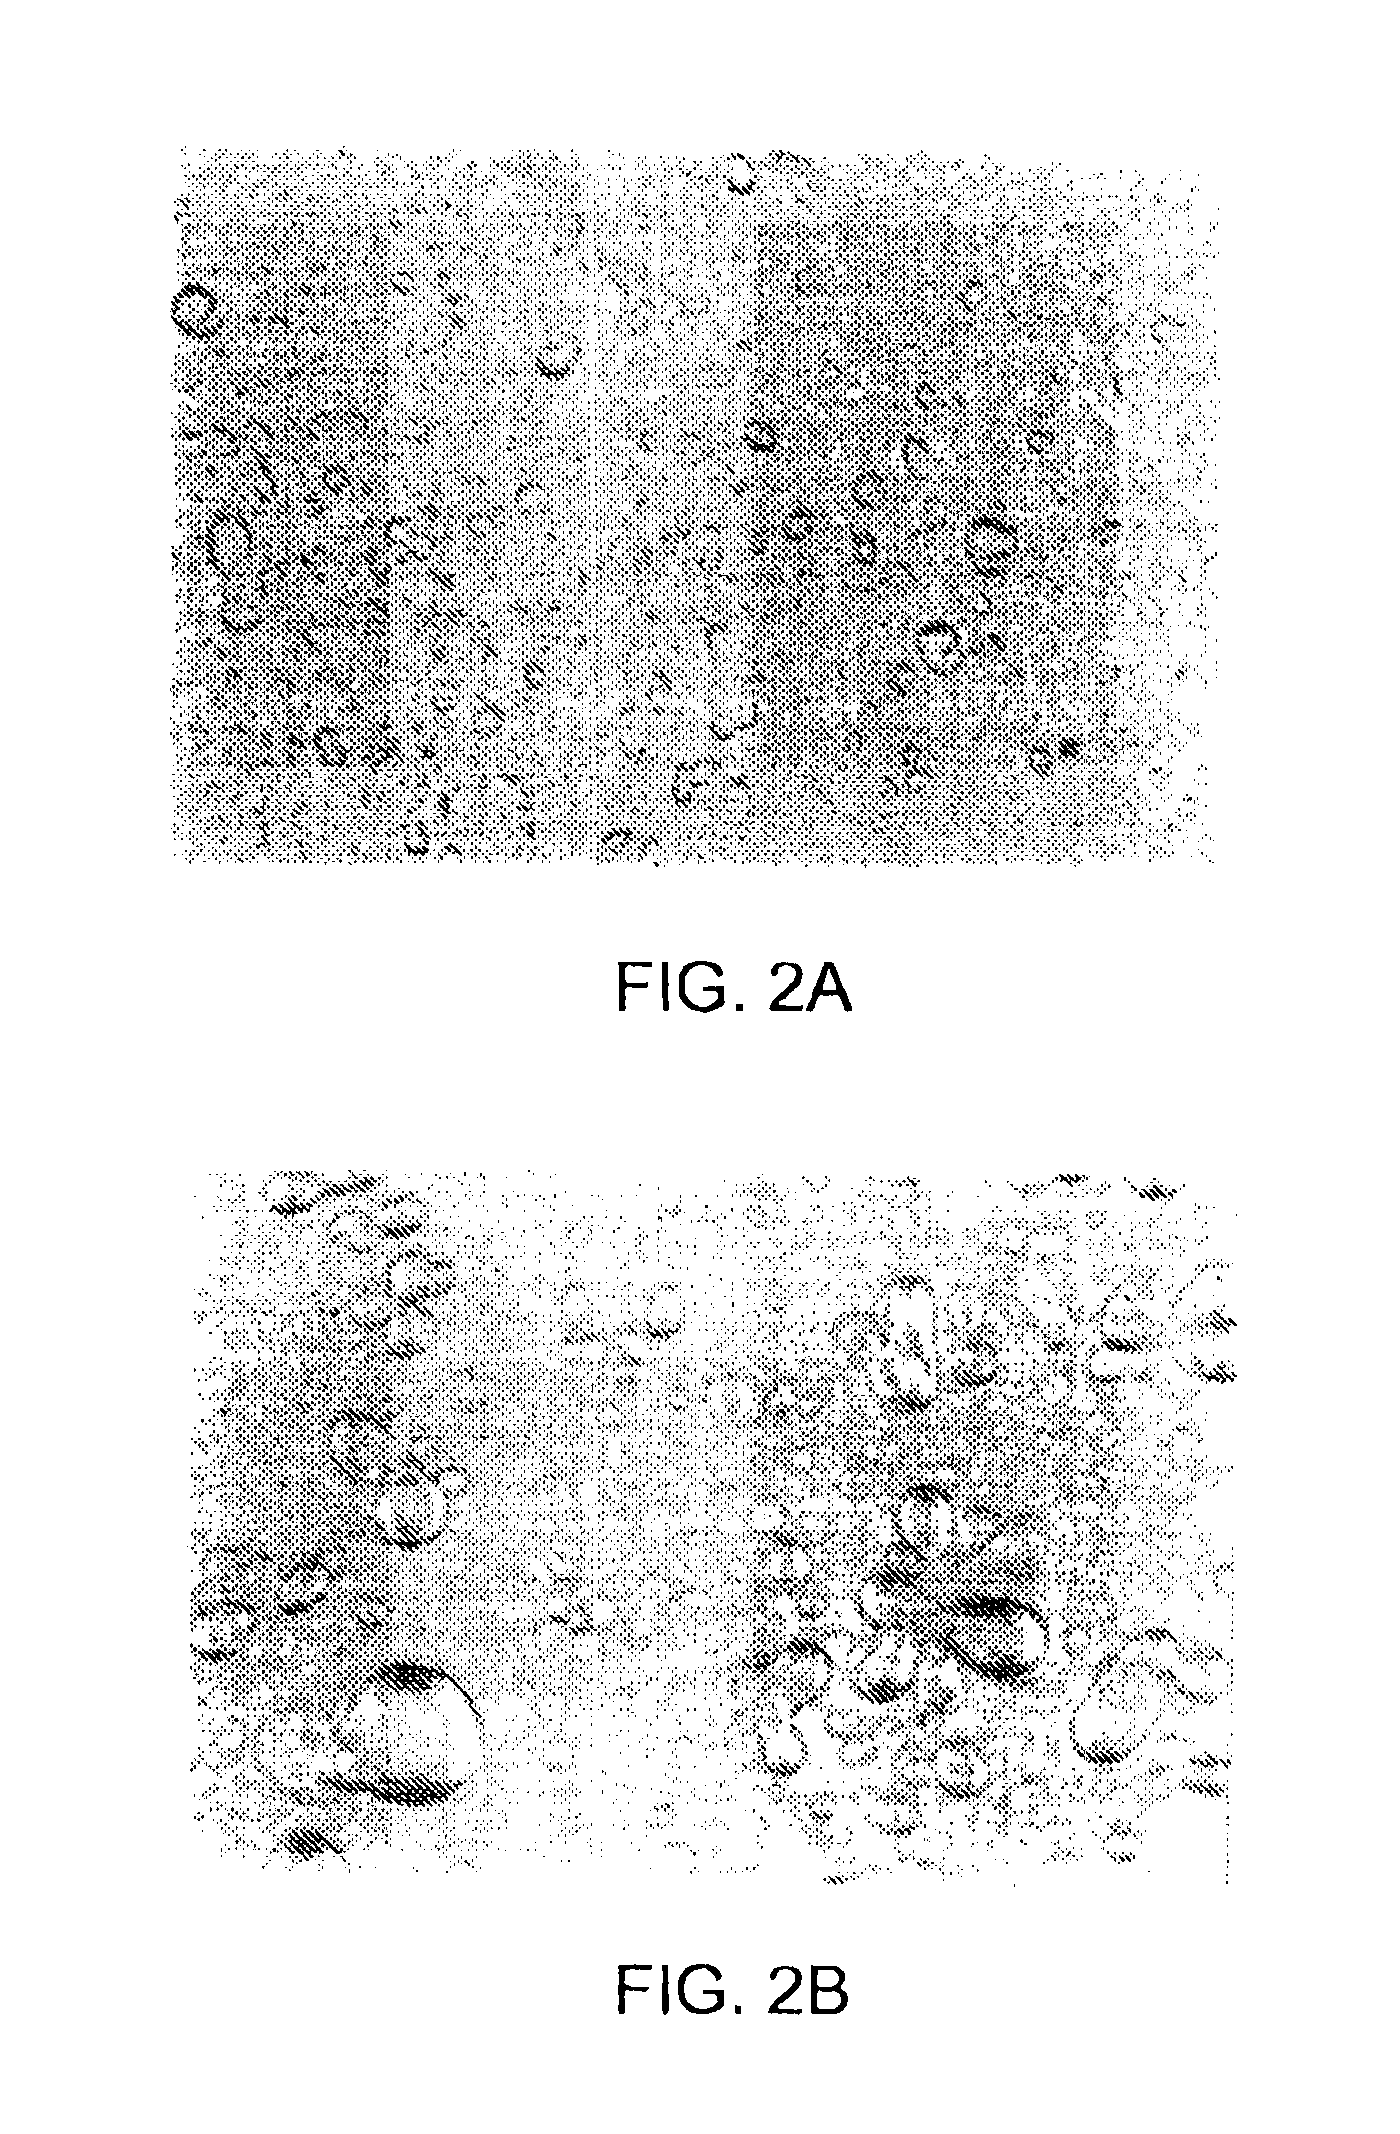 Biphasic lipid-vesicle compositions and methods for treating cervical dysplasia by intravaginal delivery